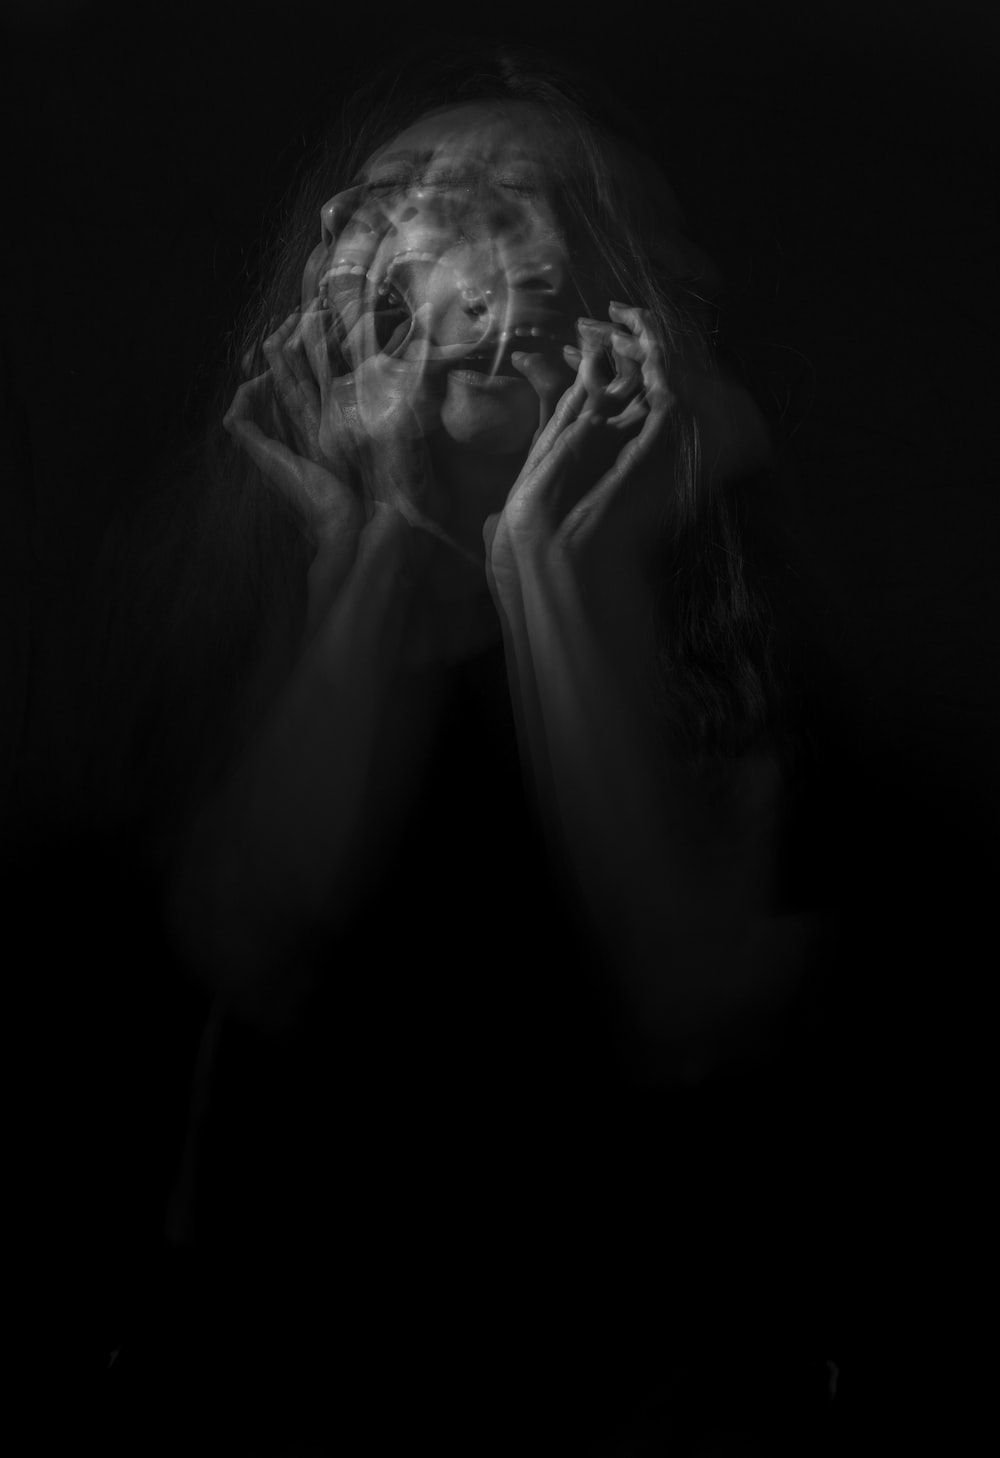 A woman with long hair covering her face with her hands. - Creepy